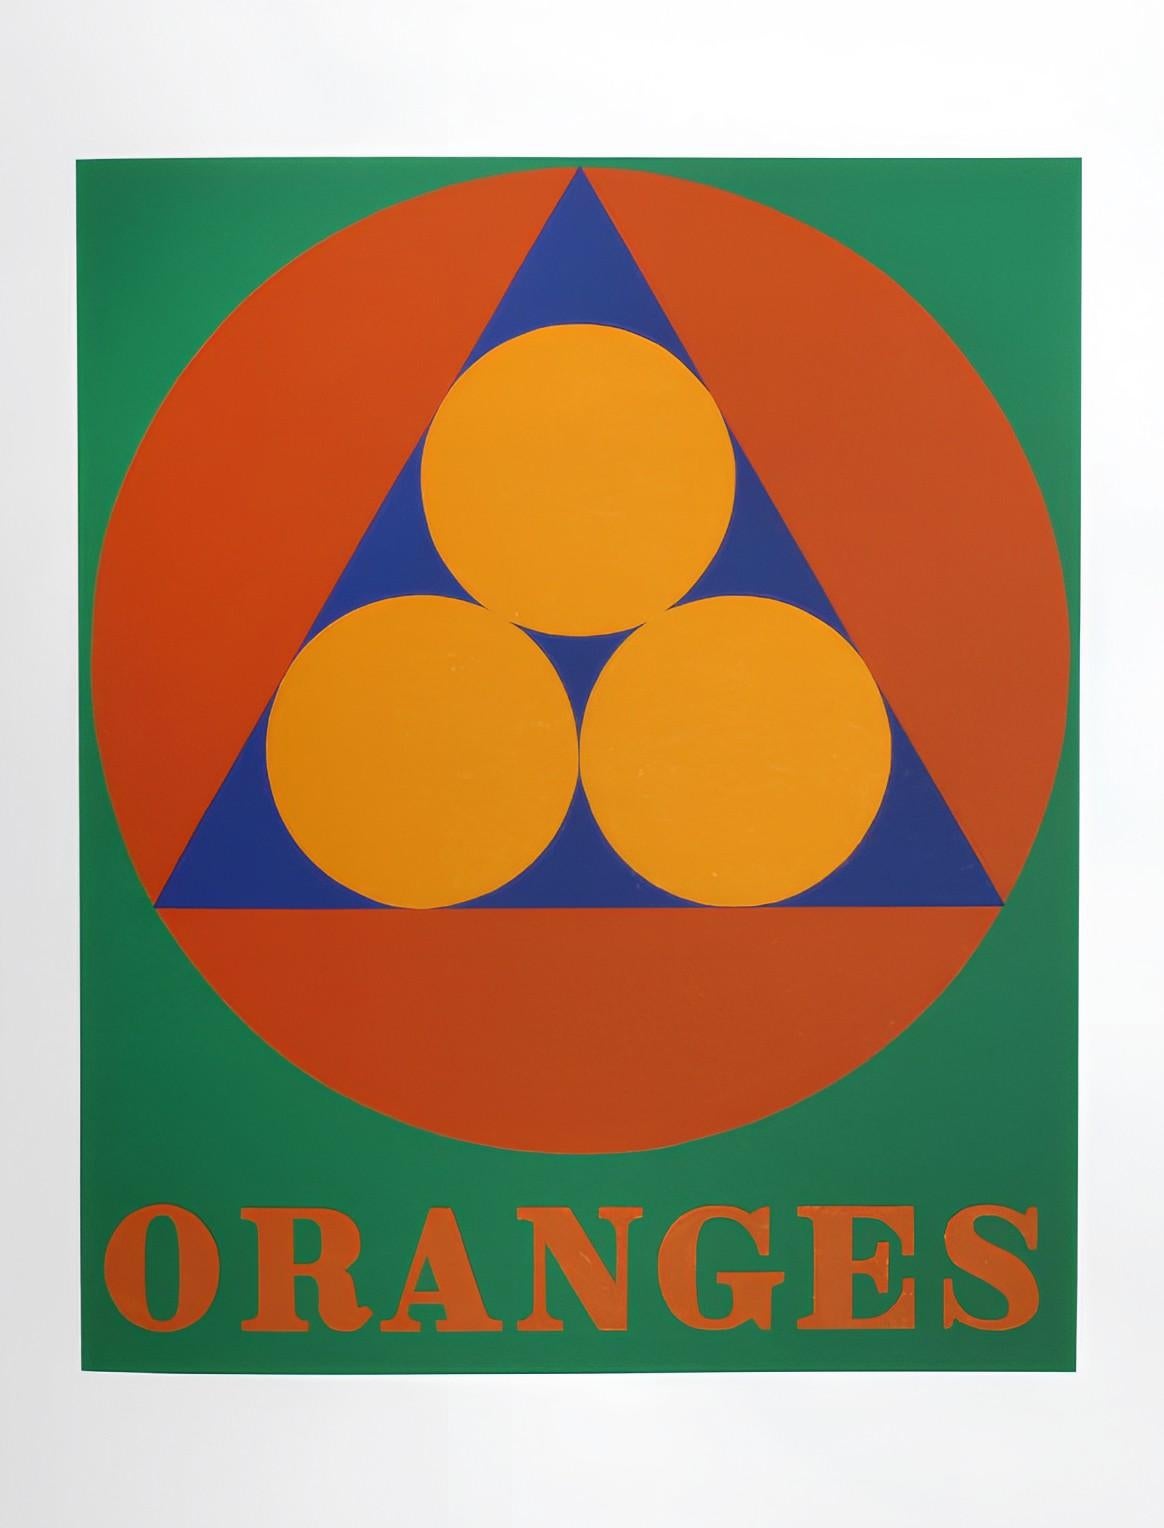 Oranges from The American Dream Portfolio - Print by Robert Indiana